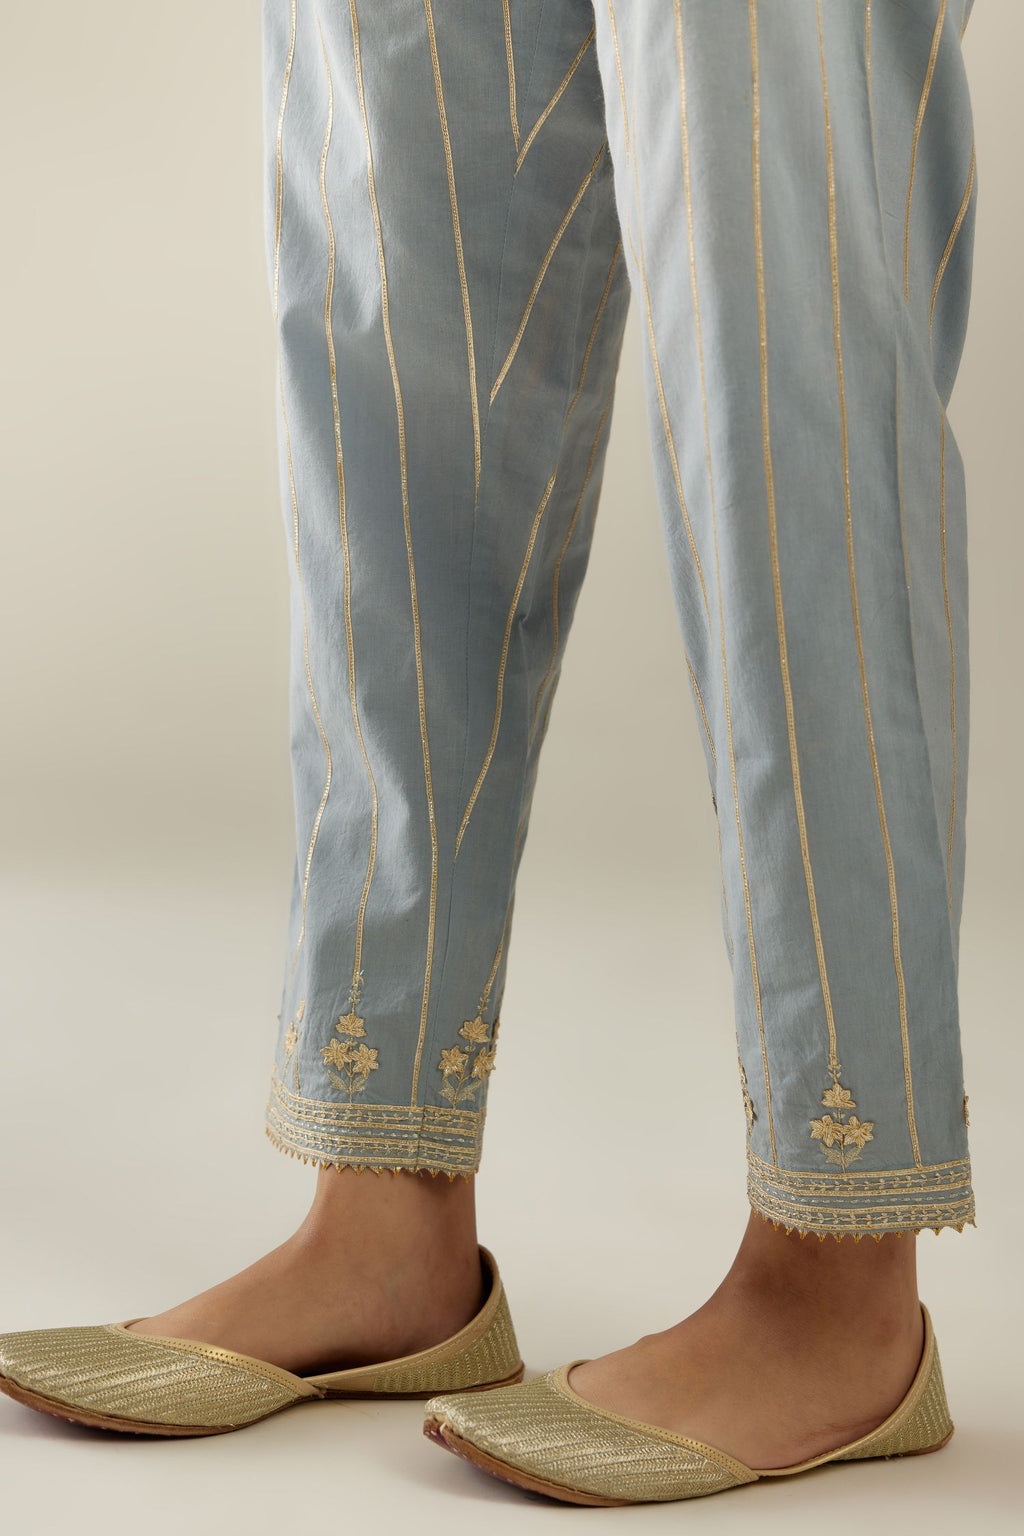 Blue cotton straight pants with all-over gold gota lines and zari embroidery at hem.